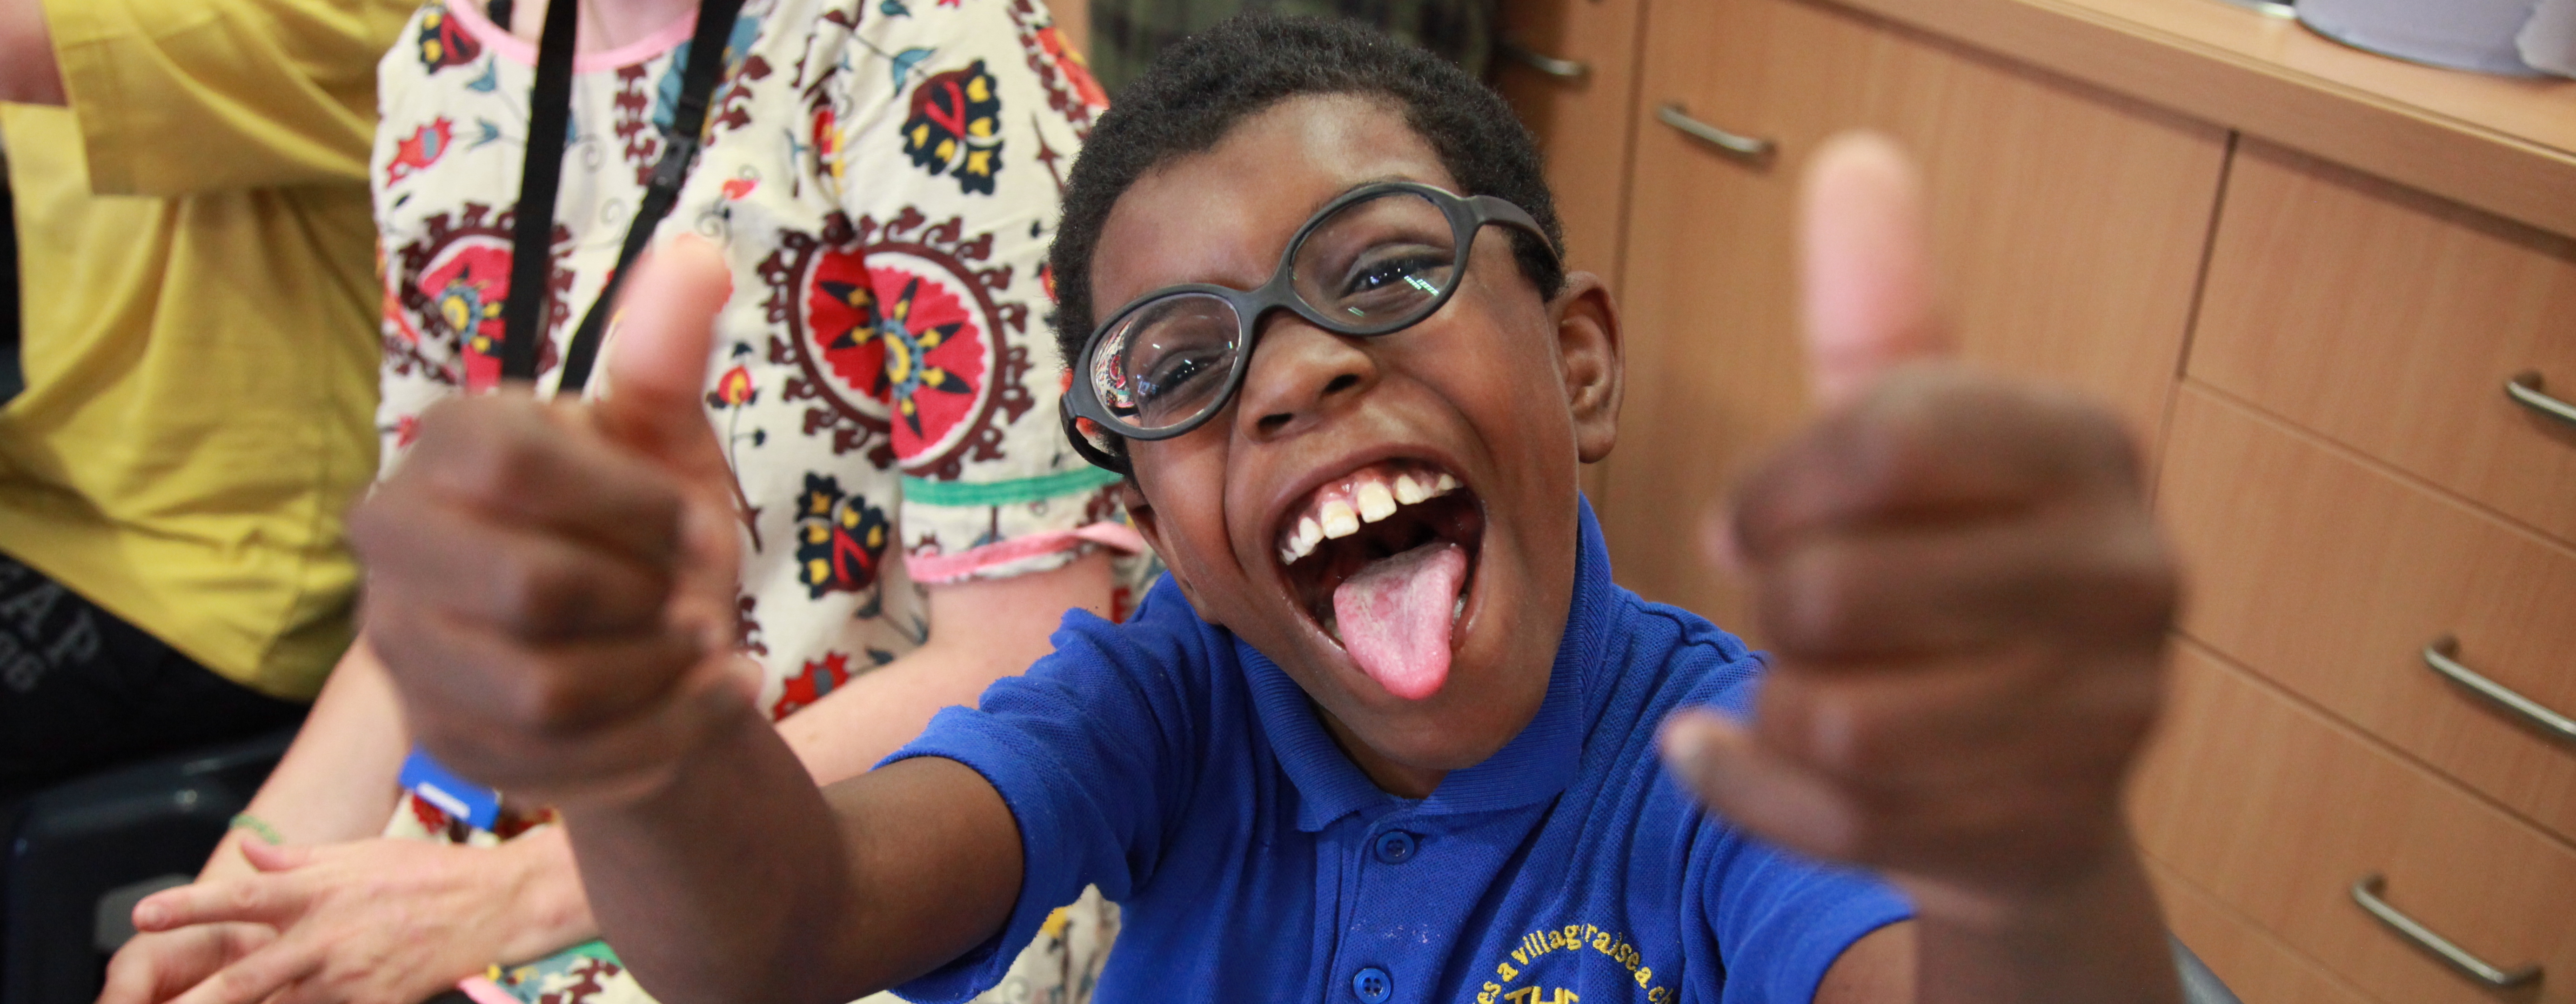 A boy in glasses giving a thumbs up